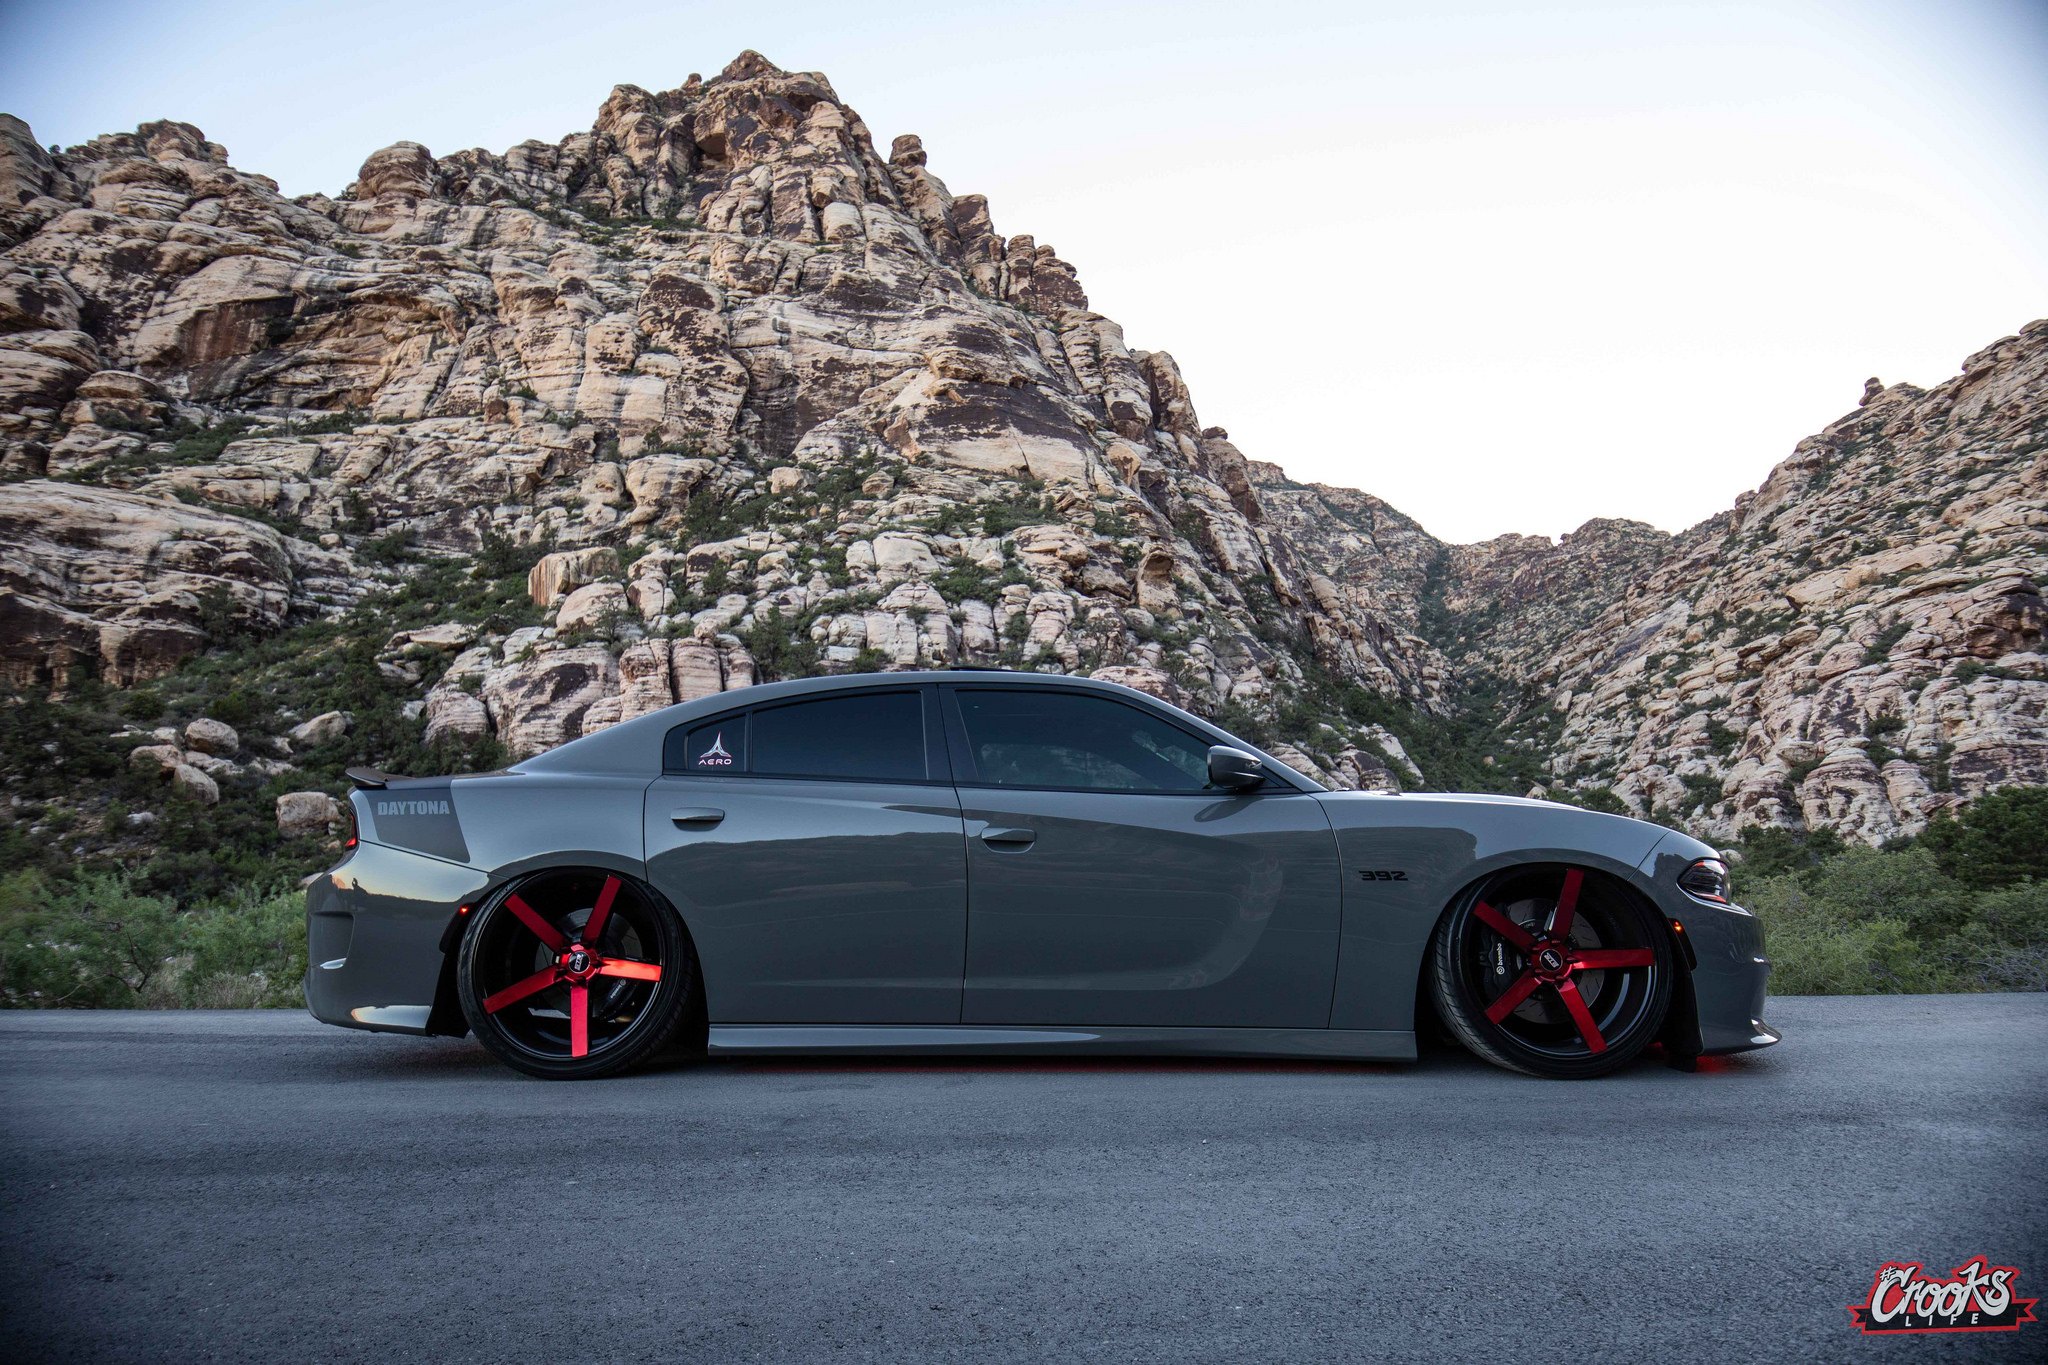 STR Rims with Brembo Brakes on Gray Dodge Charger - Photo by Jimmy Crook